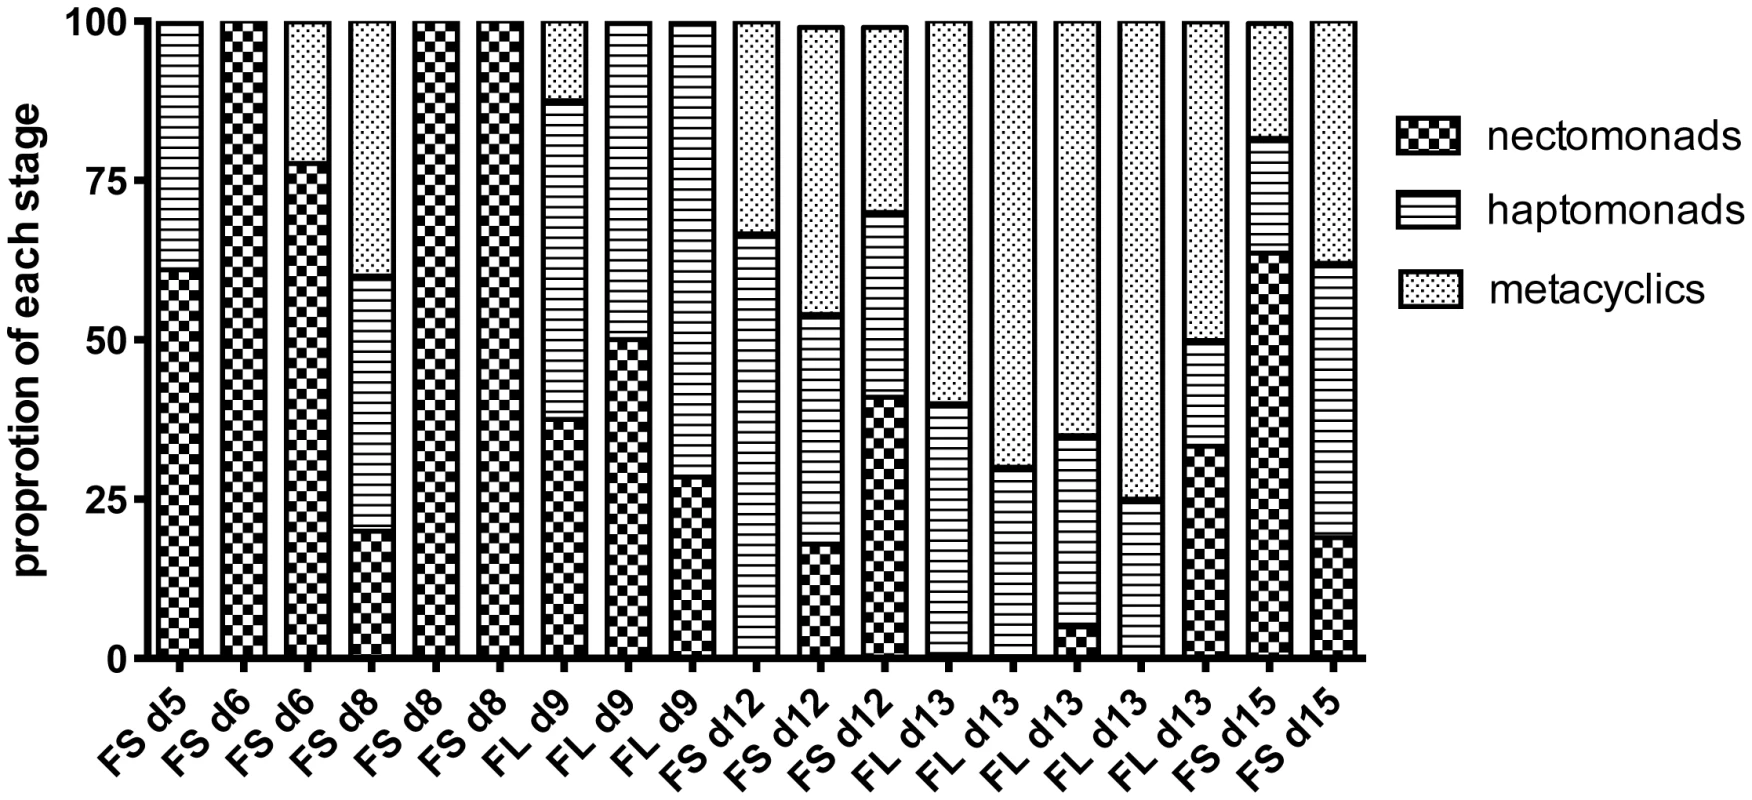 Proportion of promastigote developmental stages at the time of hybrid recovery in <i>P. duboscqi</i>.